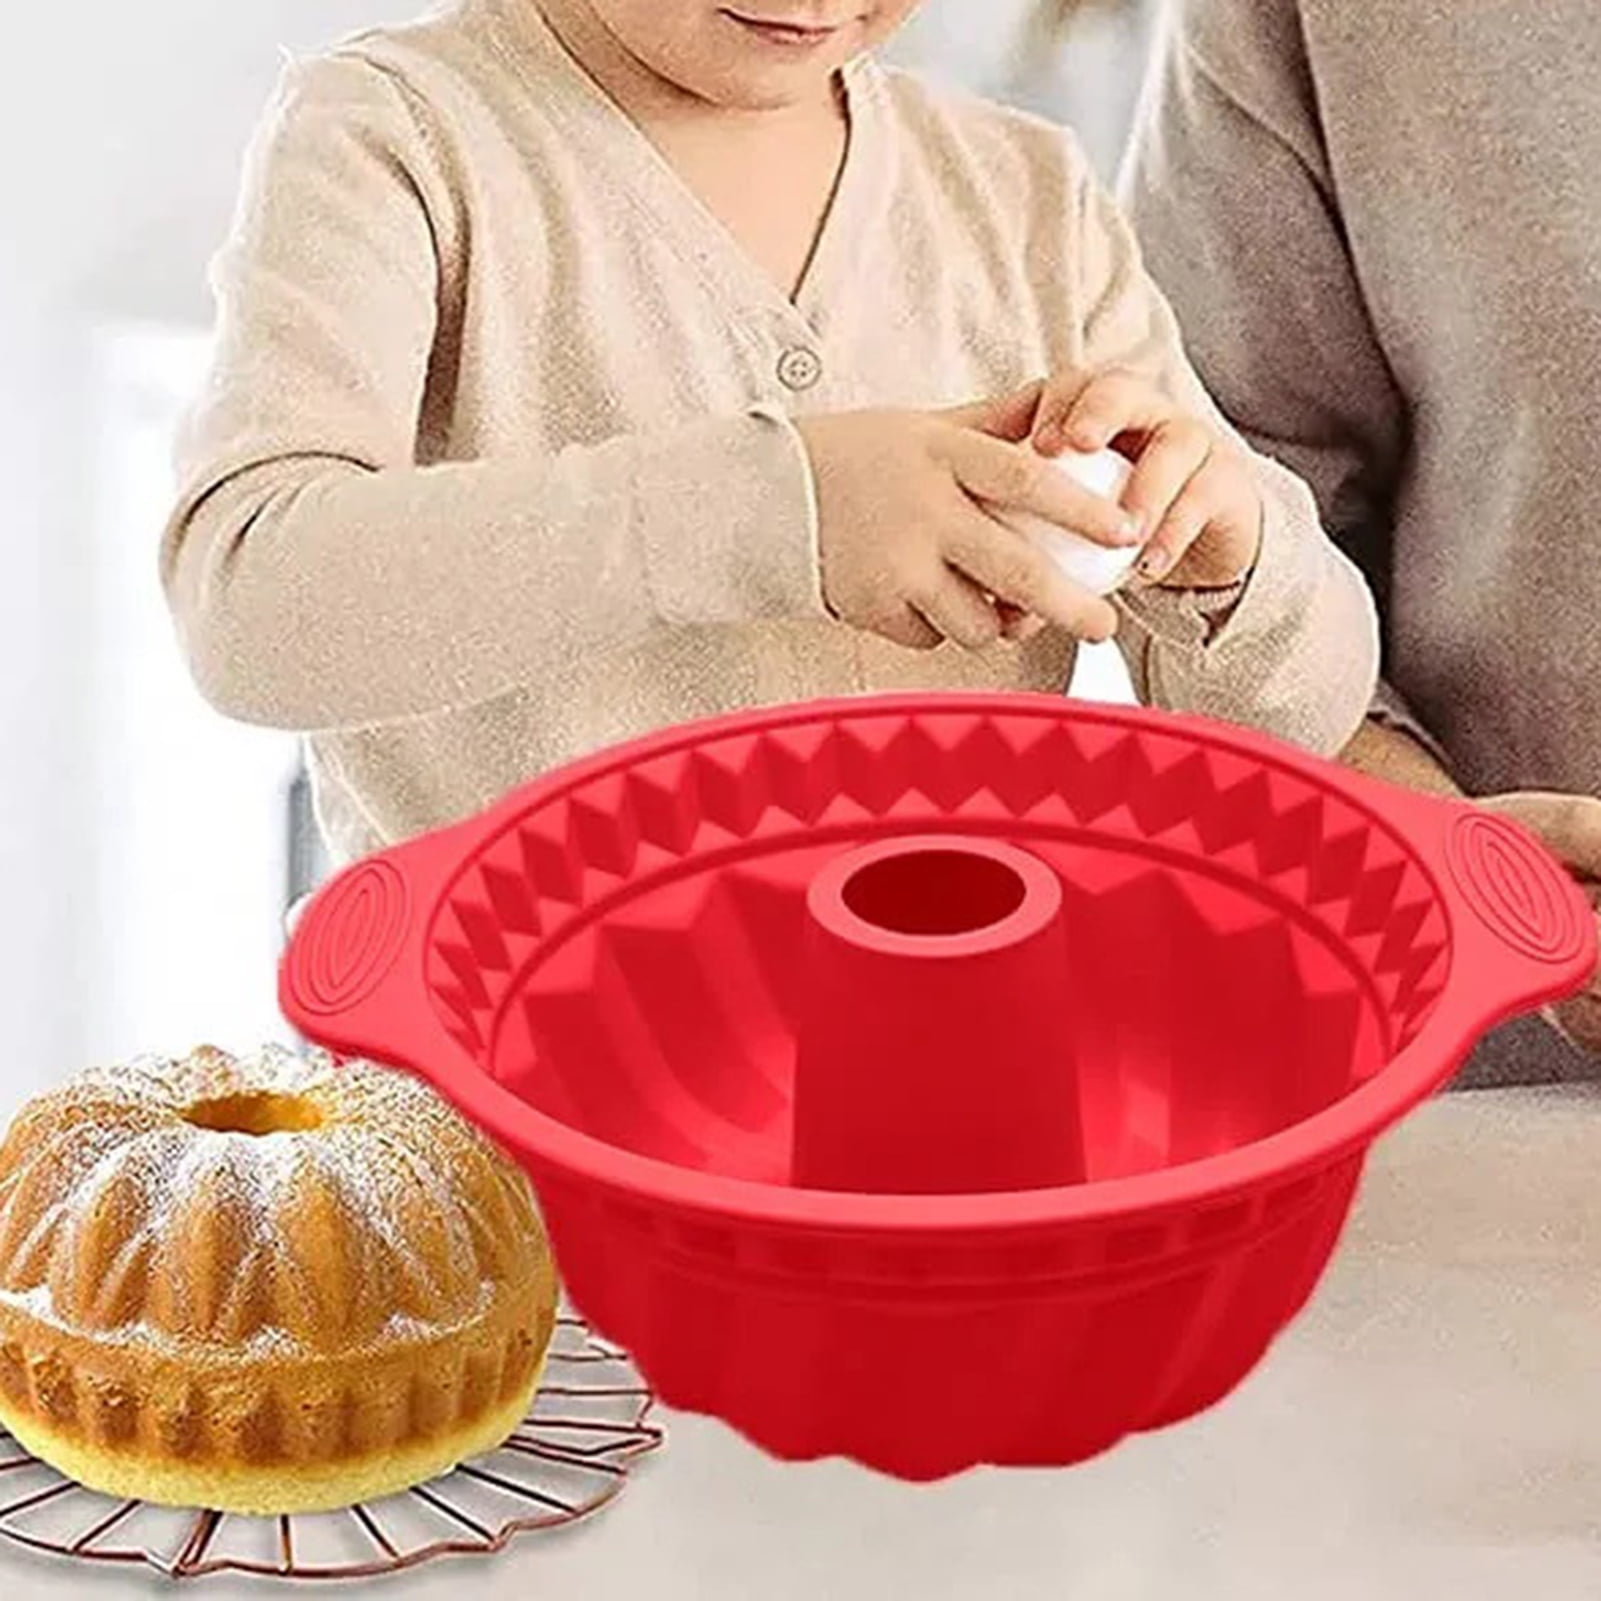  BesoAbrazo 9 Inch Silicone Bundt Cake Pan, Baking with